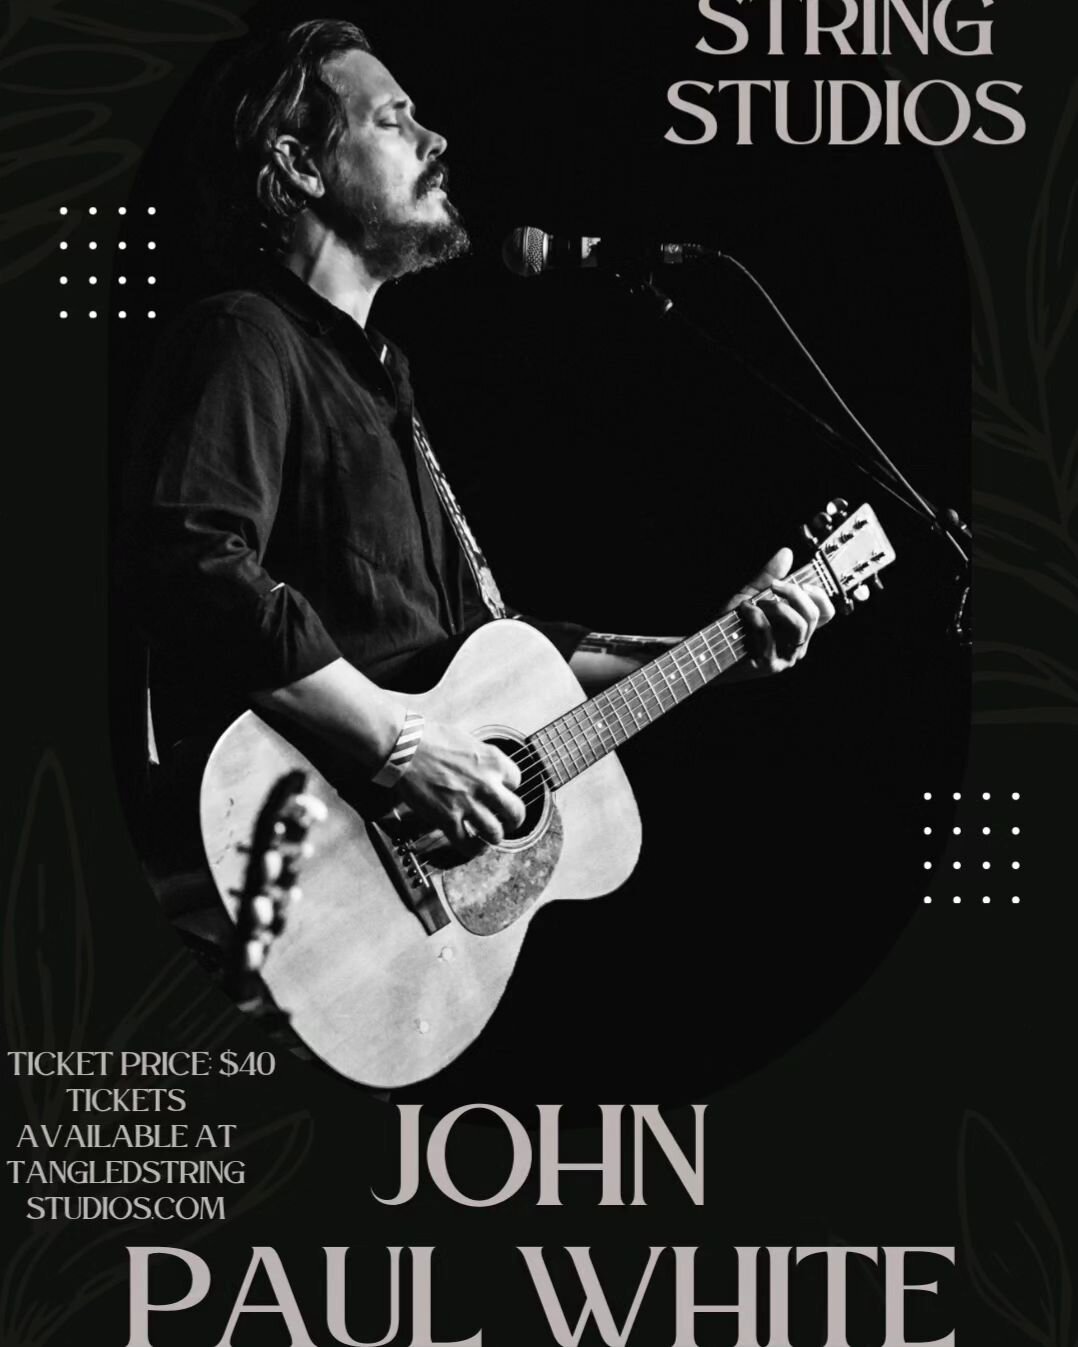 I'm super excited to be able to open for John Paul White April 5th!